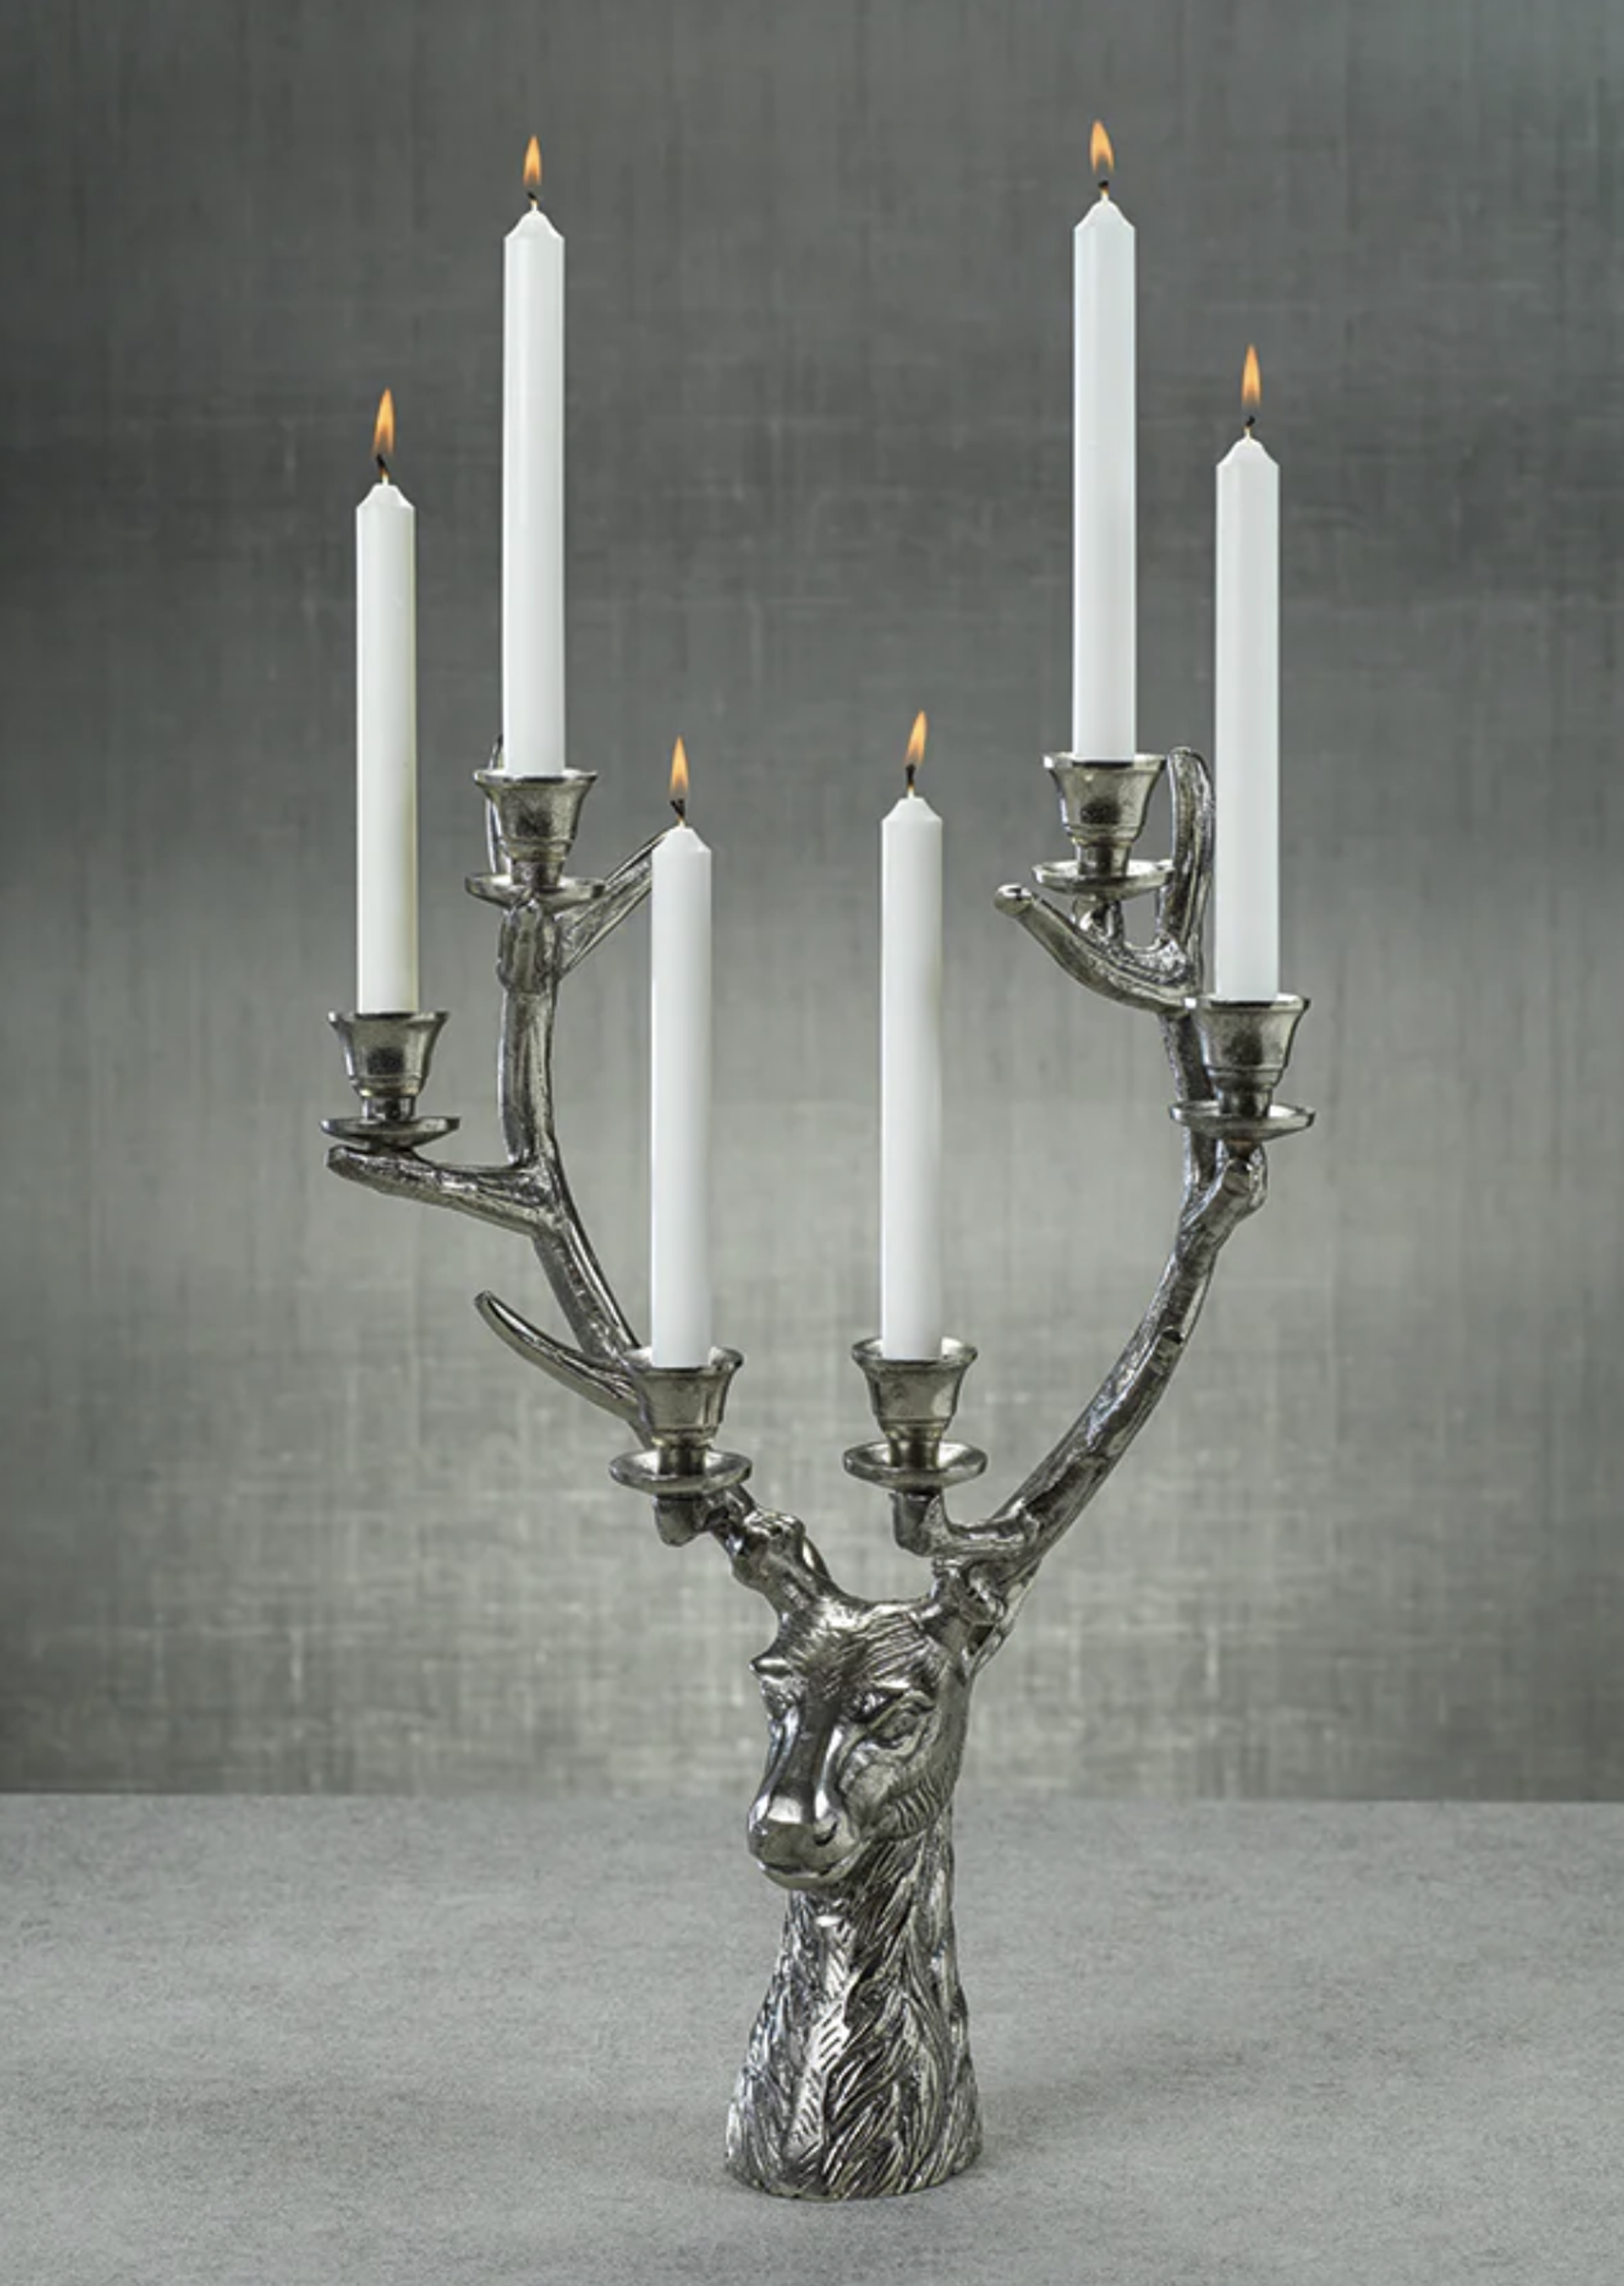 Stag Head 6-Tier Candleholder - Small by Argent